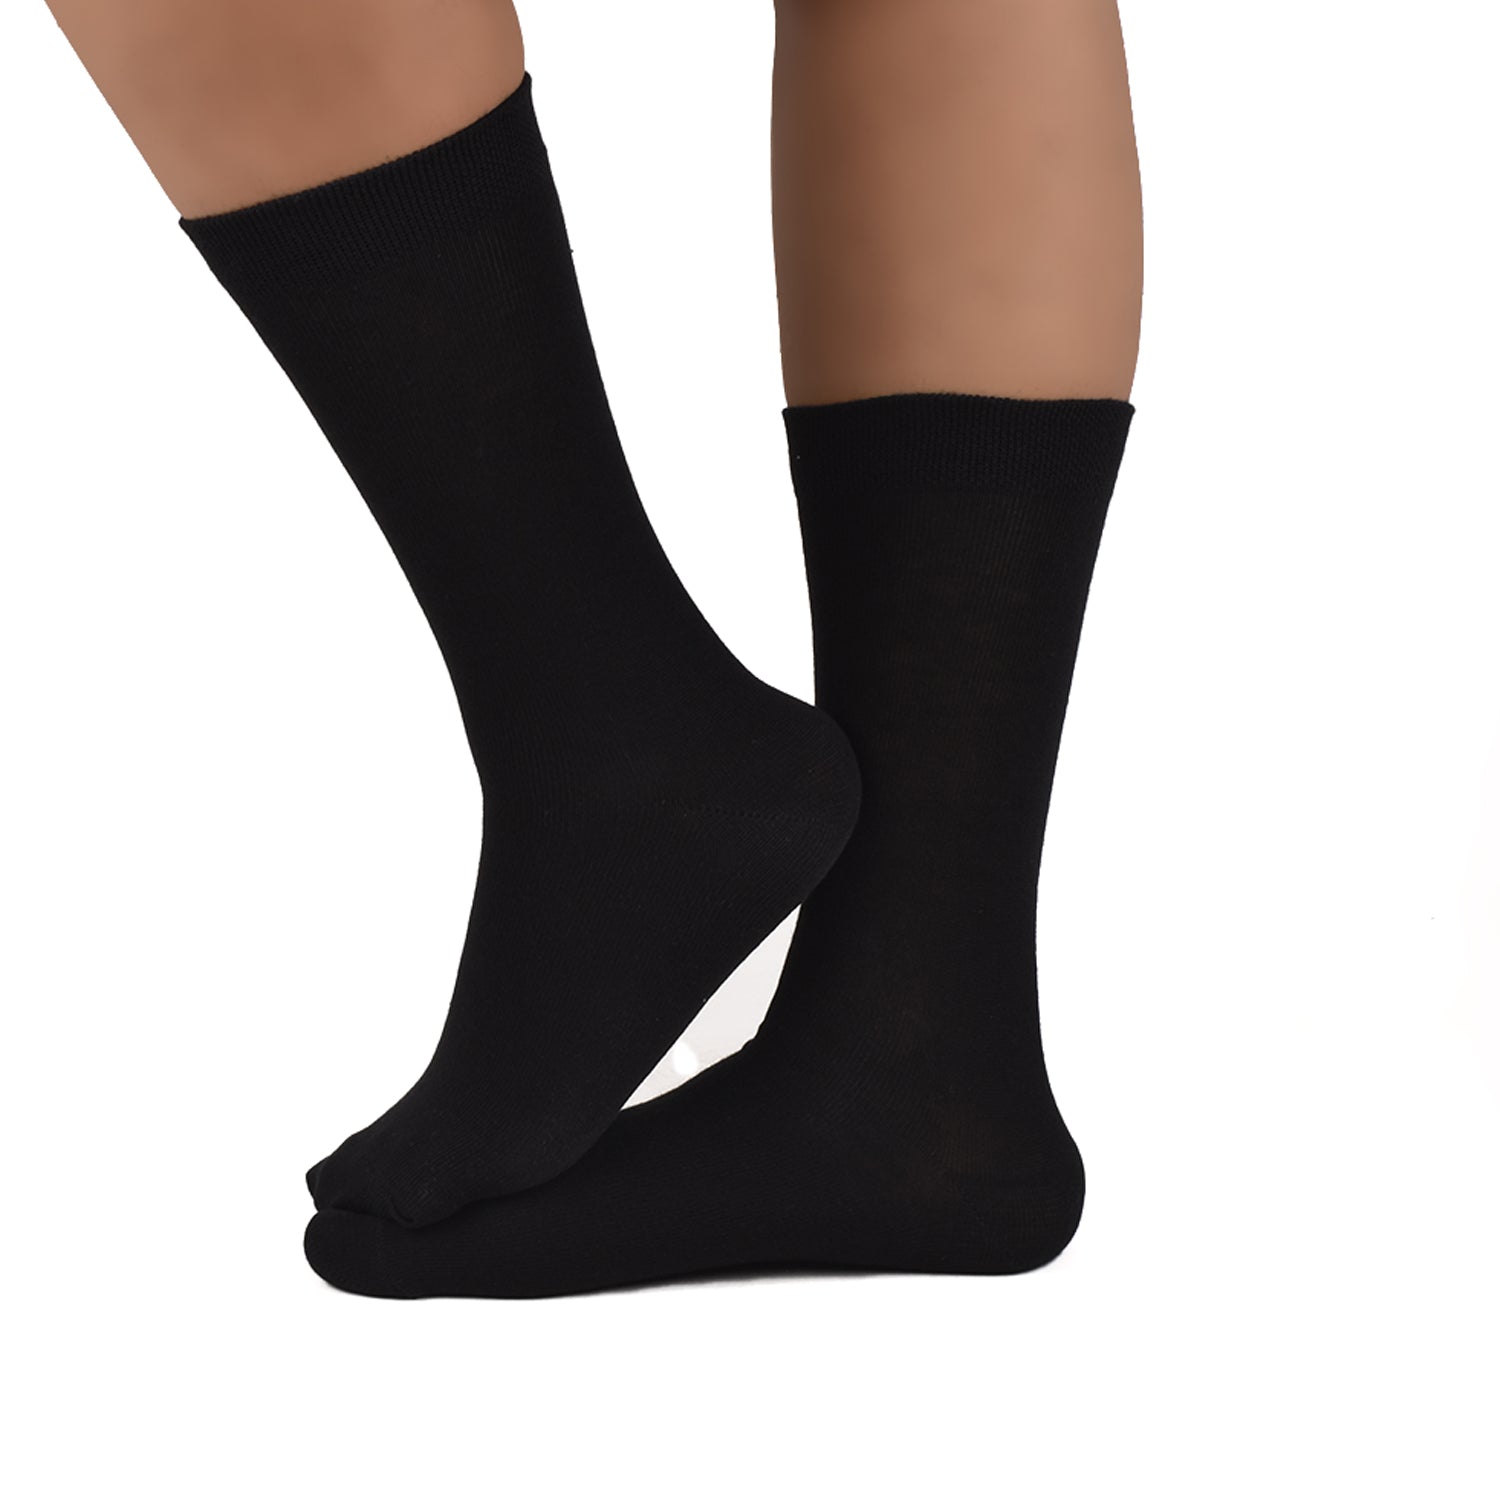 Kids Organic Cotton School Socks - Unisex - Calf length- Pack of 5 (Black)- Extra soft and Breathable